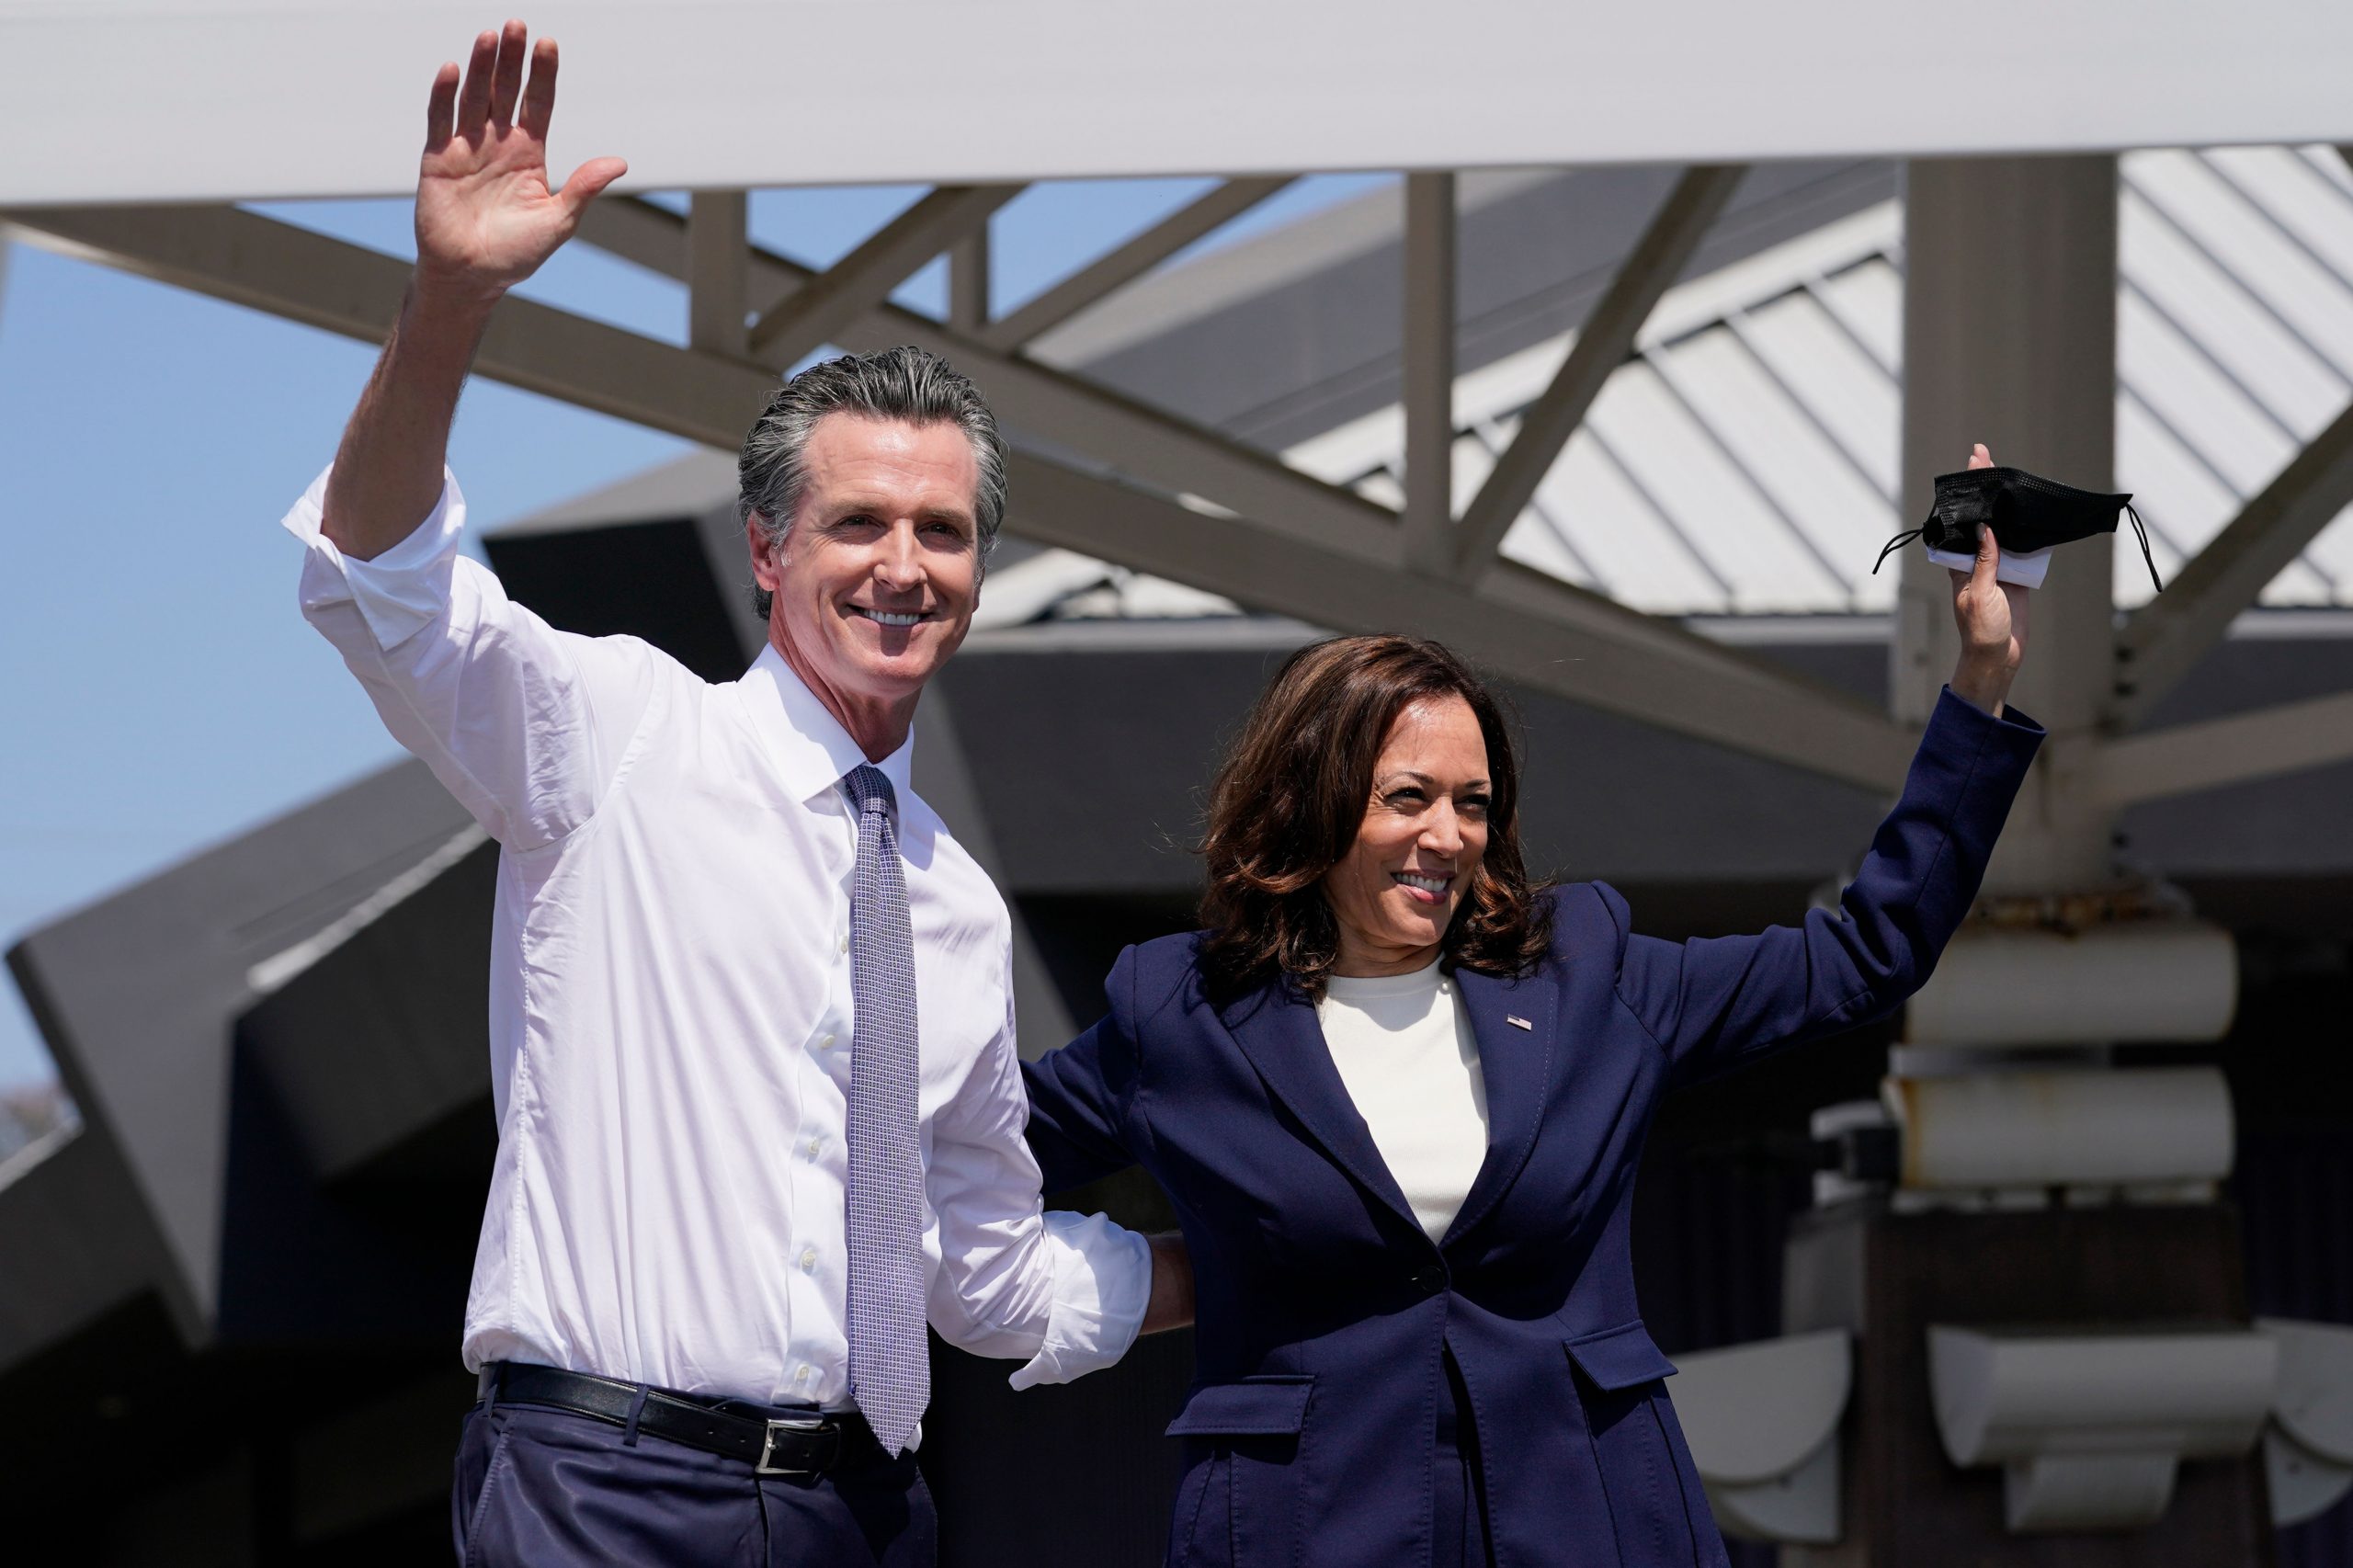 VP Harris rallies with California governor Newsom ahead of recall elections